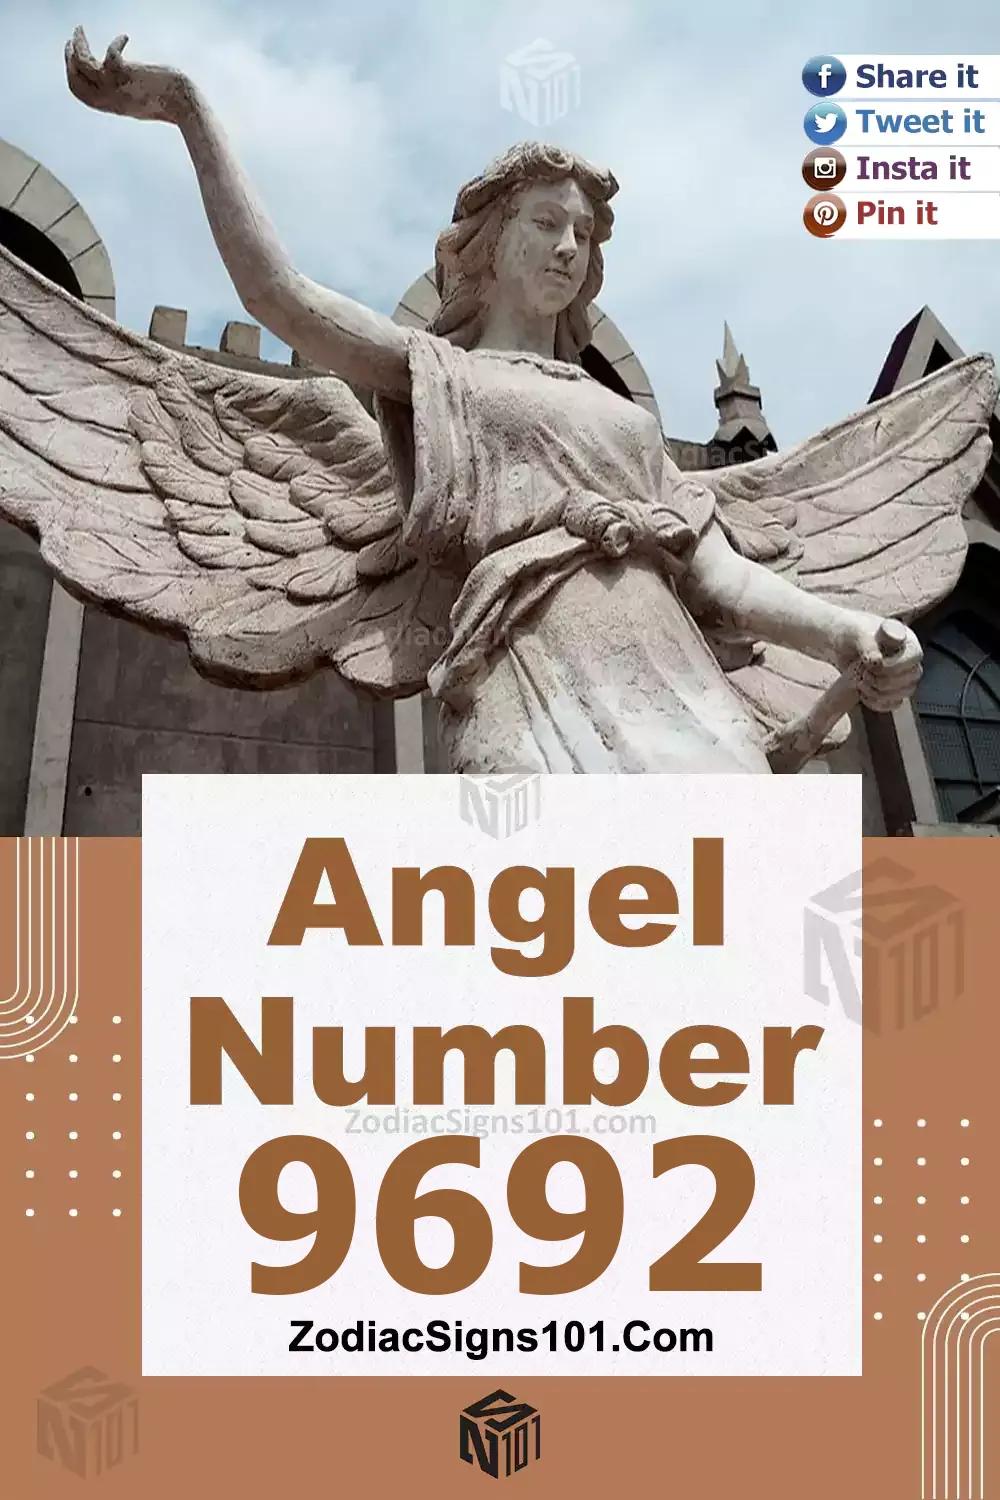 9692 Angel Number Meaning